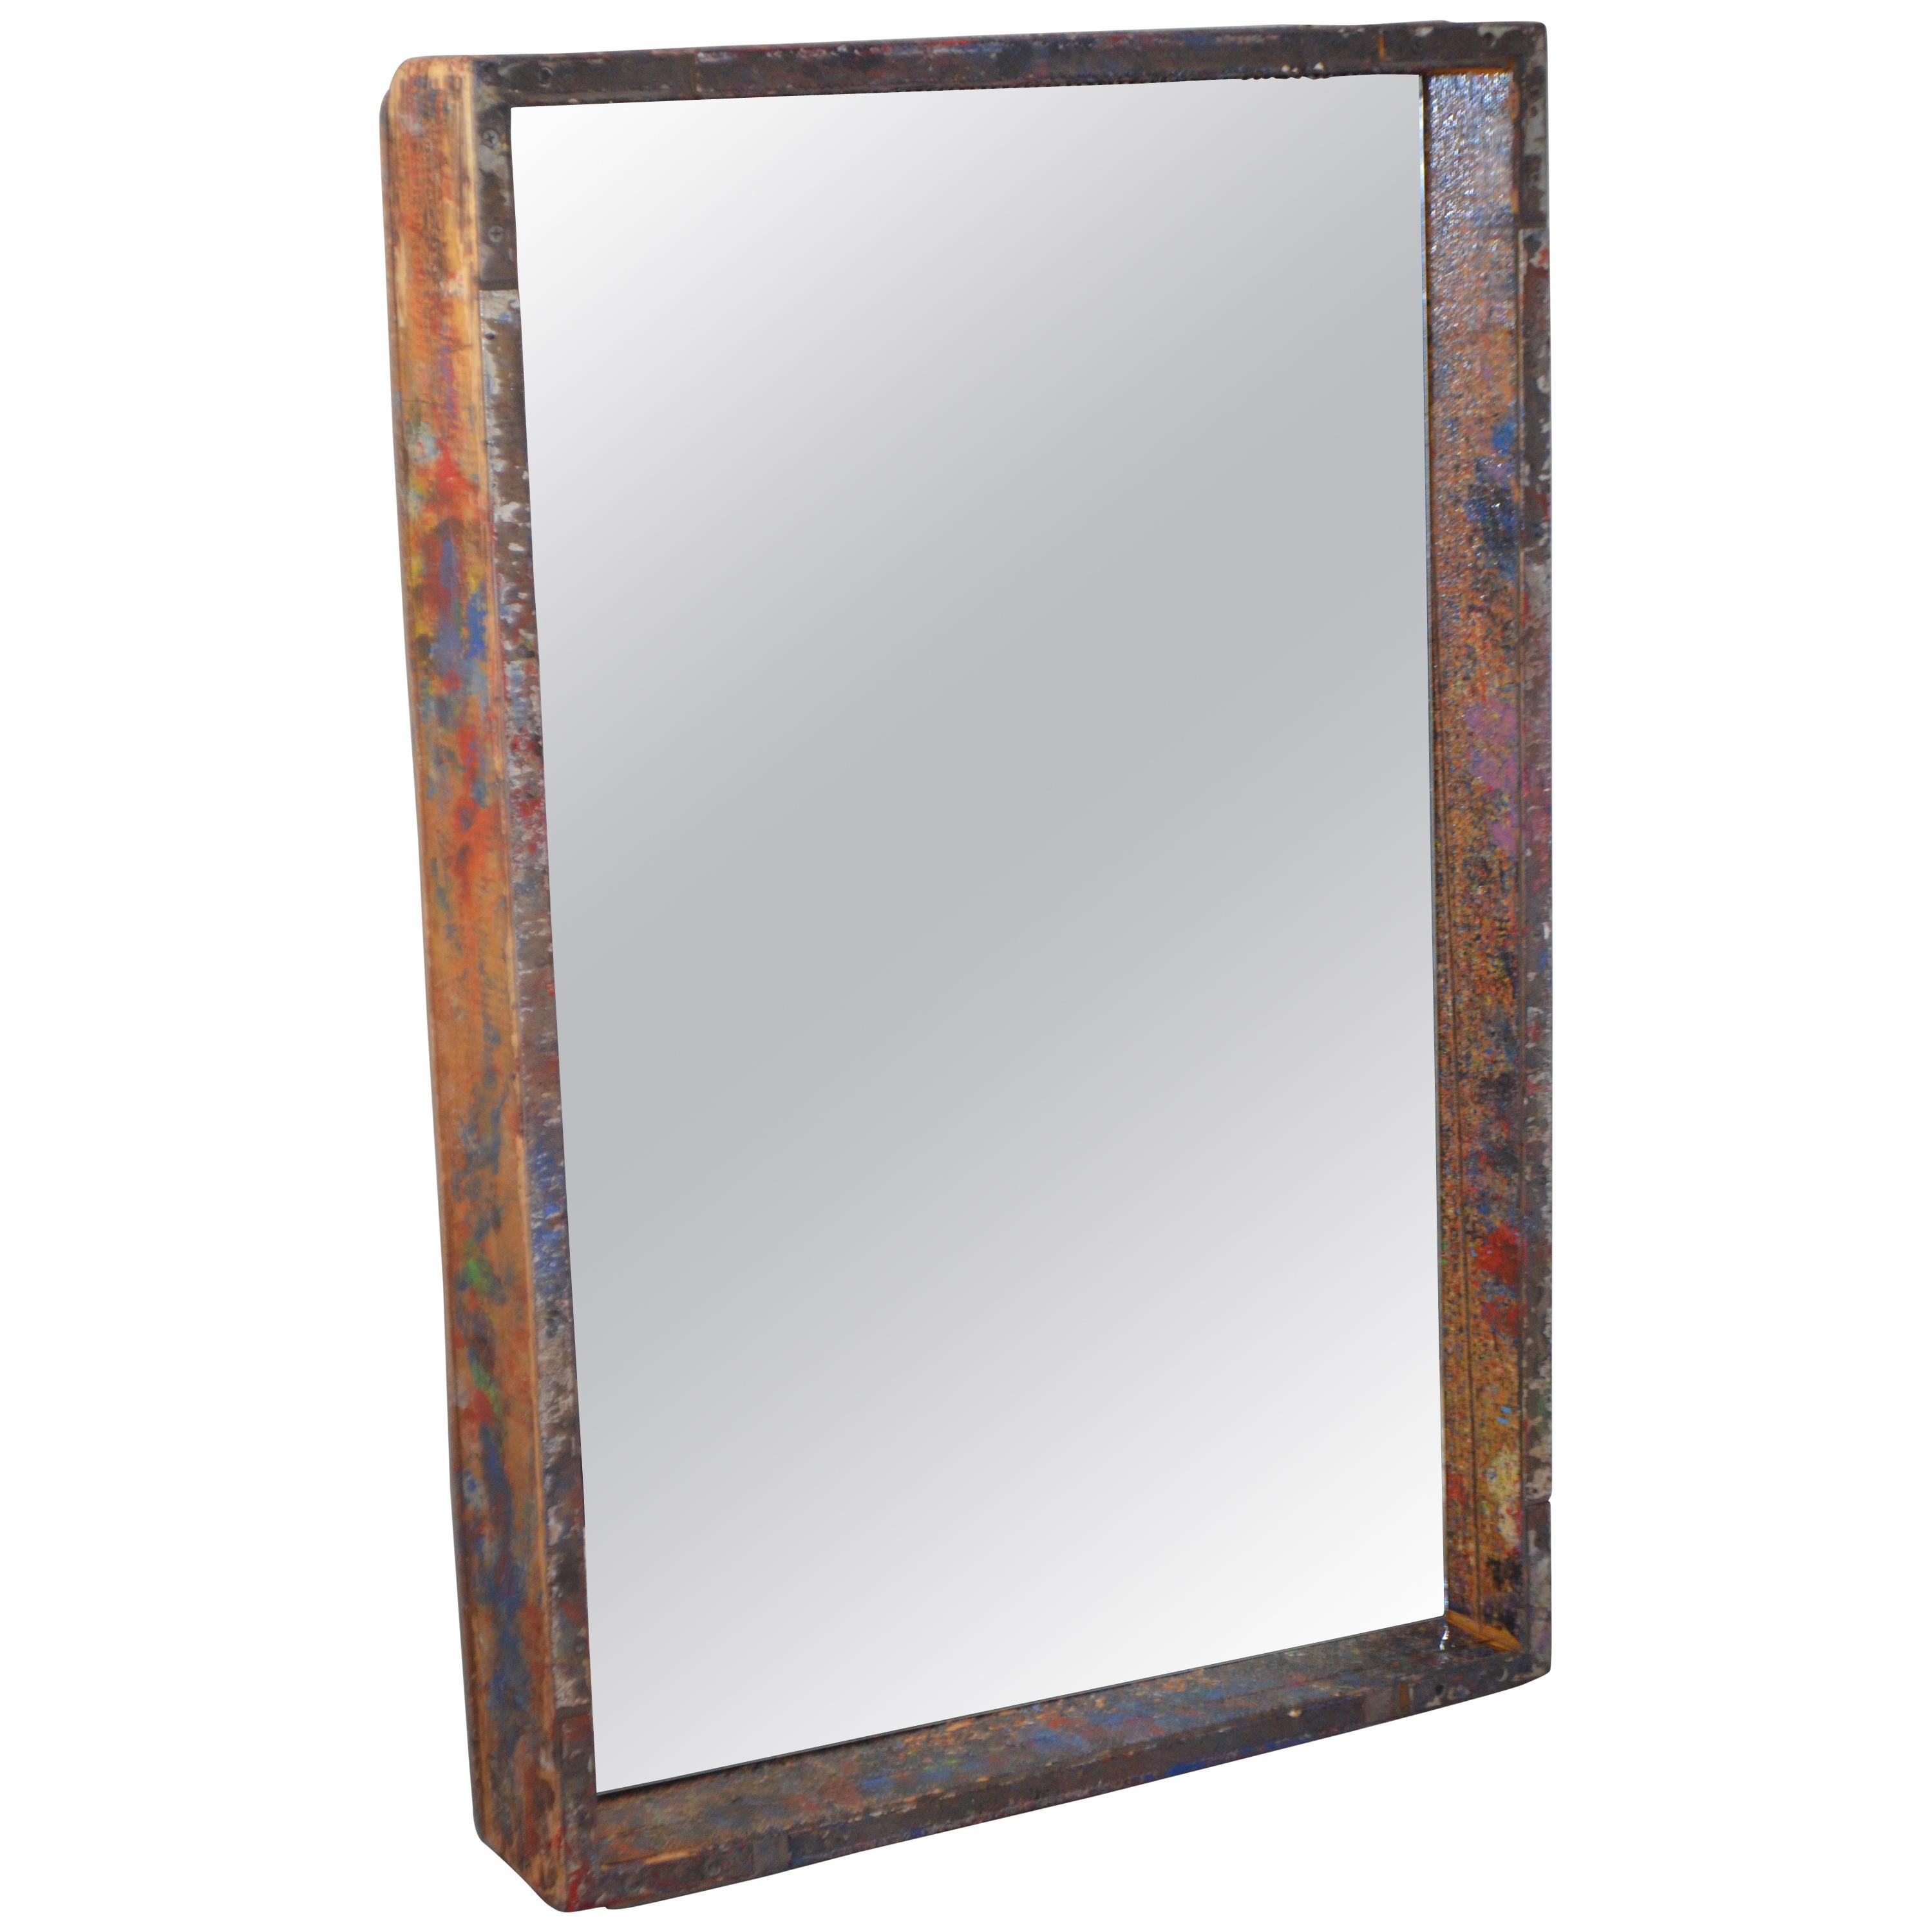 Mirror in Industrial Wood Frame Box from 1950s Auto Paint Factory For Sale